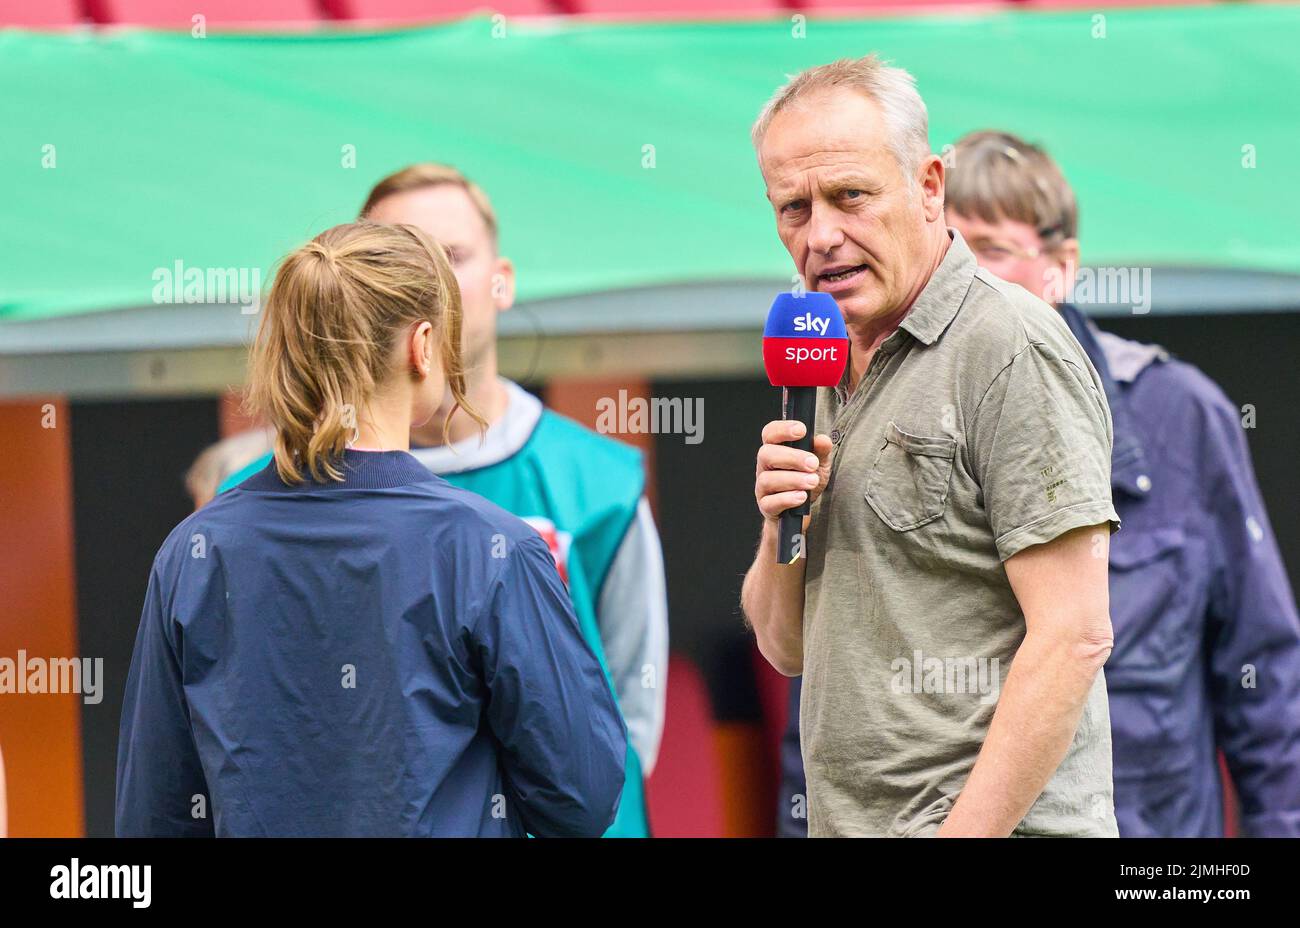 Christian STREICH, FRG Trainer in TV interview in the match FC AUGSBURG - SC FREIBURG 0-4 1.German Football League on Aug 06, 2022 in Augsburg, Germany. Season 2022/2023, matchday 1, 1.Bundesliga, FCB, Munich, 1.Spieltag © Peter Schatz / Alamy Live News    - DFL REGULATIONS PROHIBIT ANY USE OF PHOTOGRAPHS as IMAGE SEQUENCES and/or QUASI-VIDEO - Stock Photo